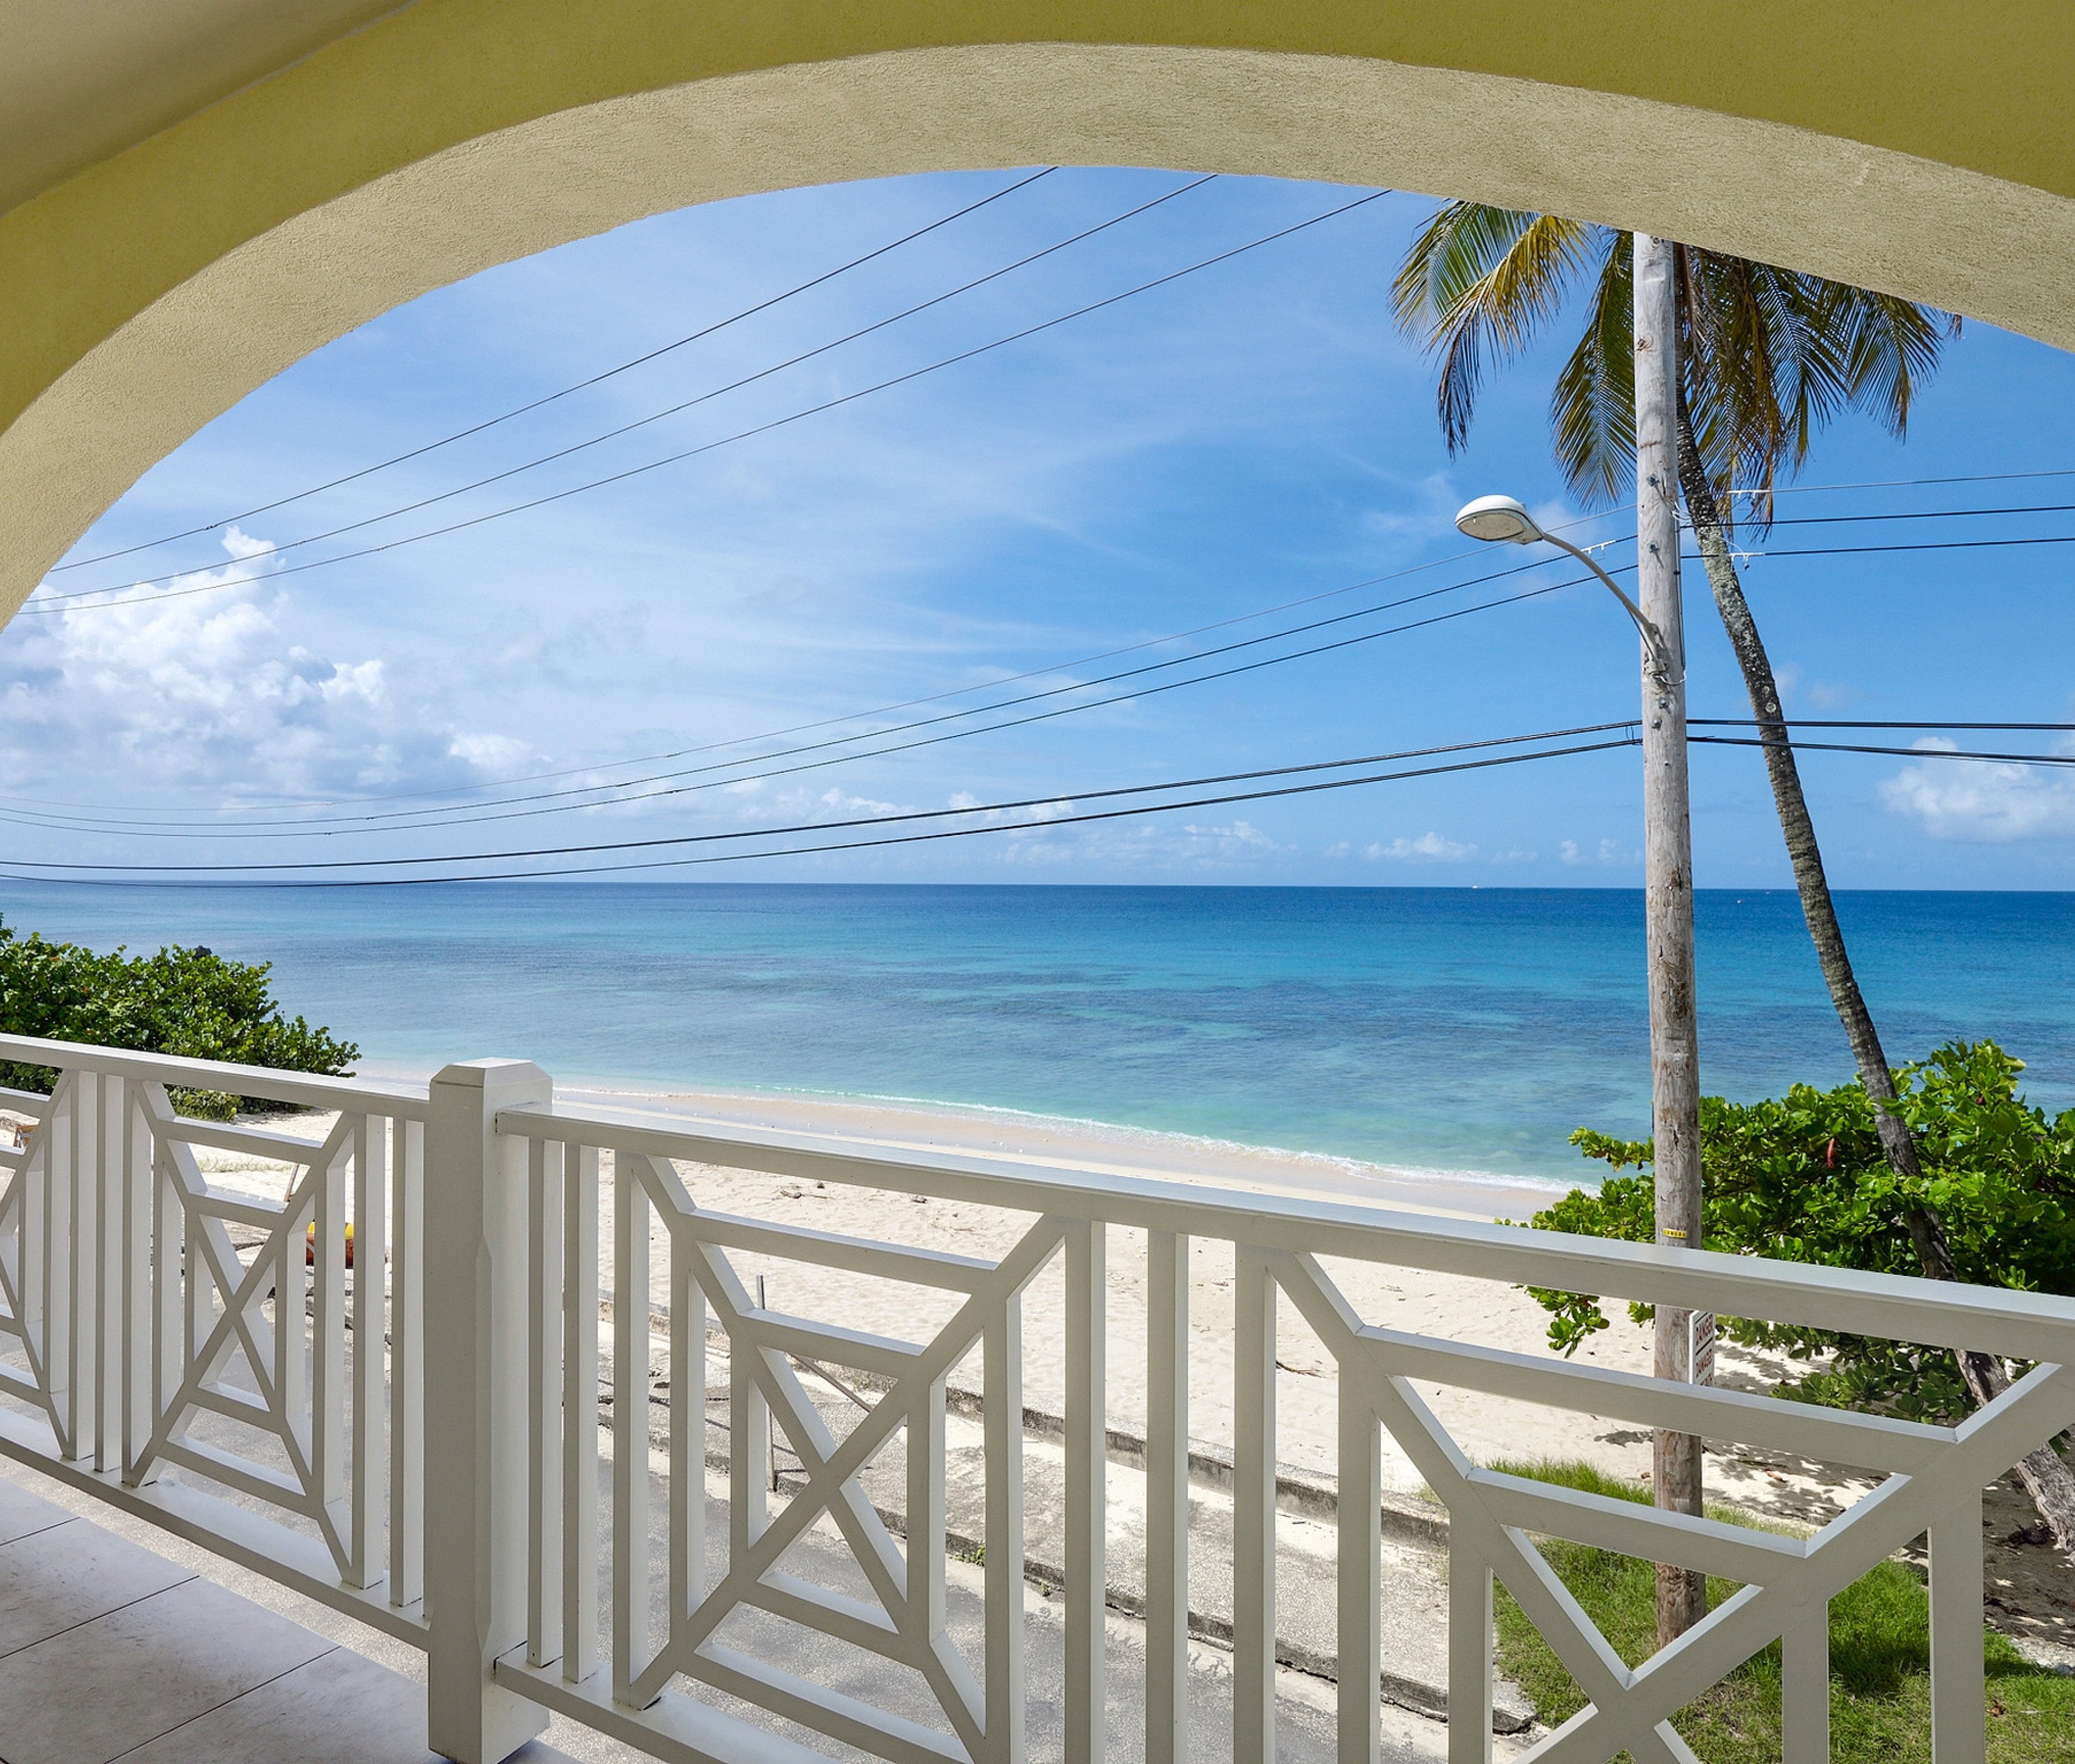 https://www.thetopvillas.com/destinations/caribbean/barbados/st-peter/speightstown/white-sands-g4-speightstown